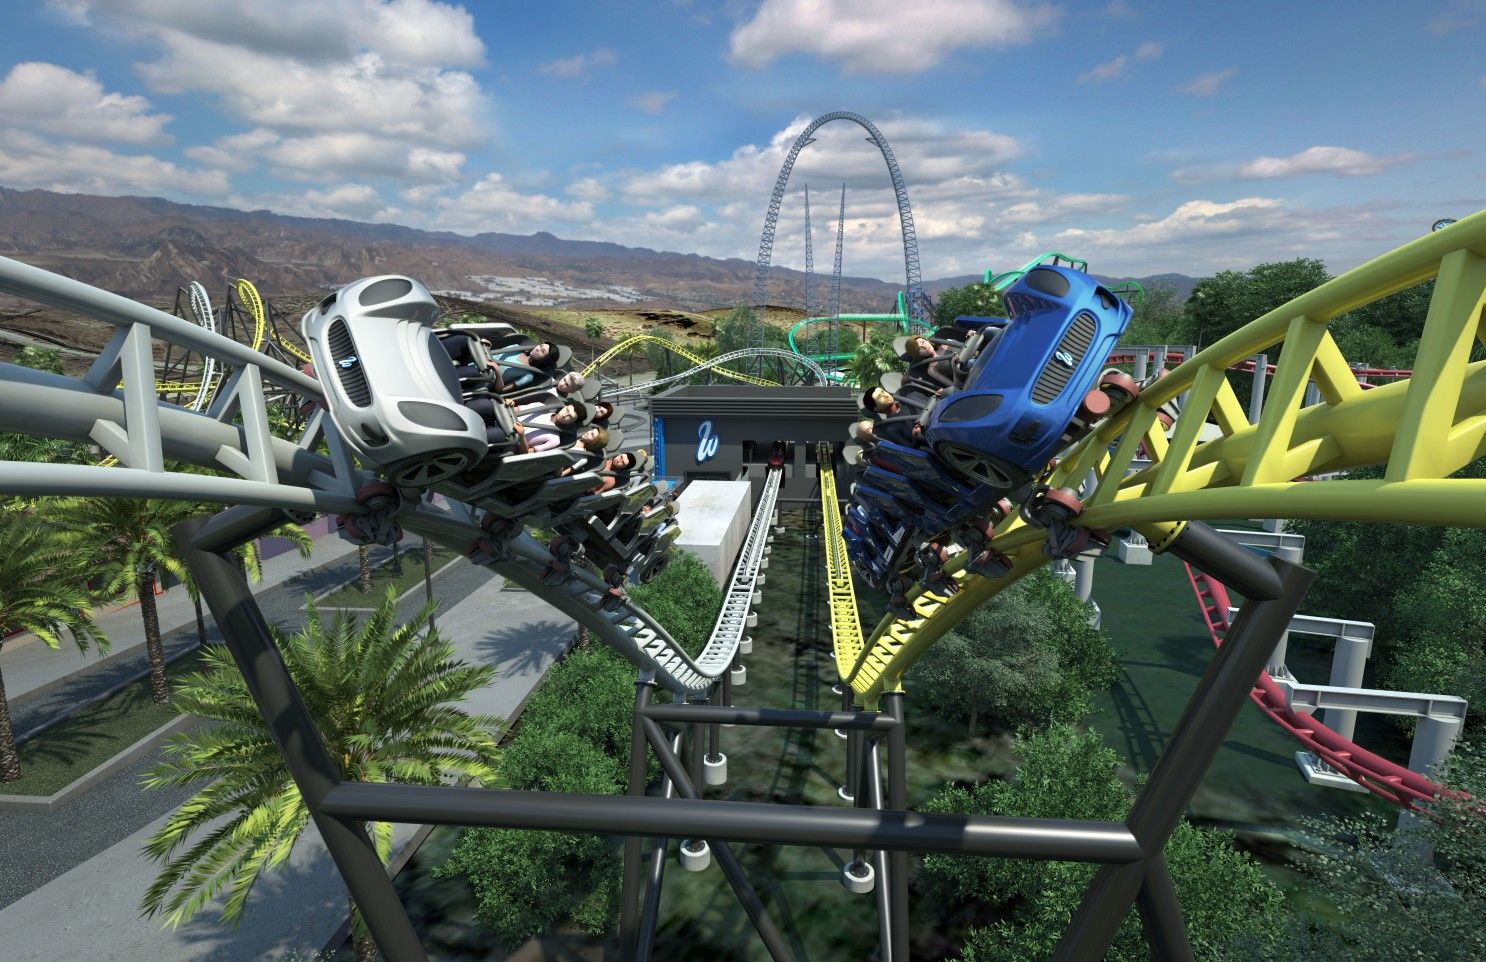 West Coast Custom's rollorcoaster features side by side coaster action